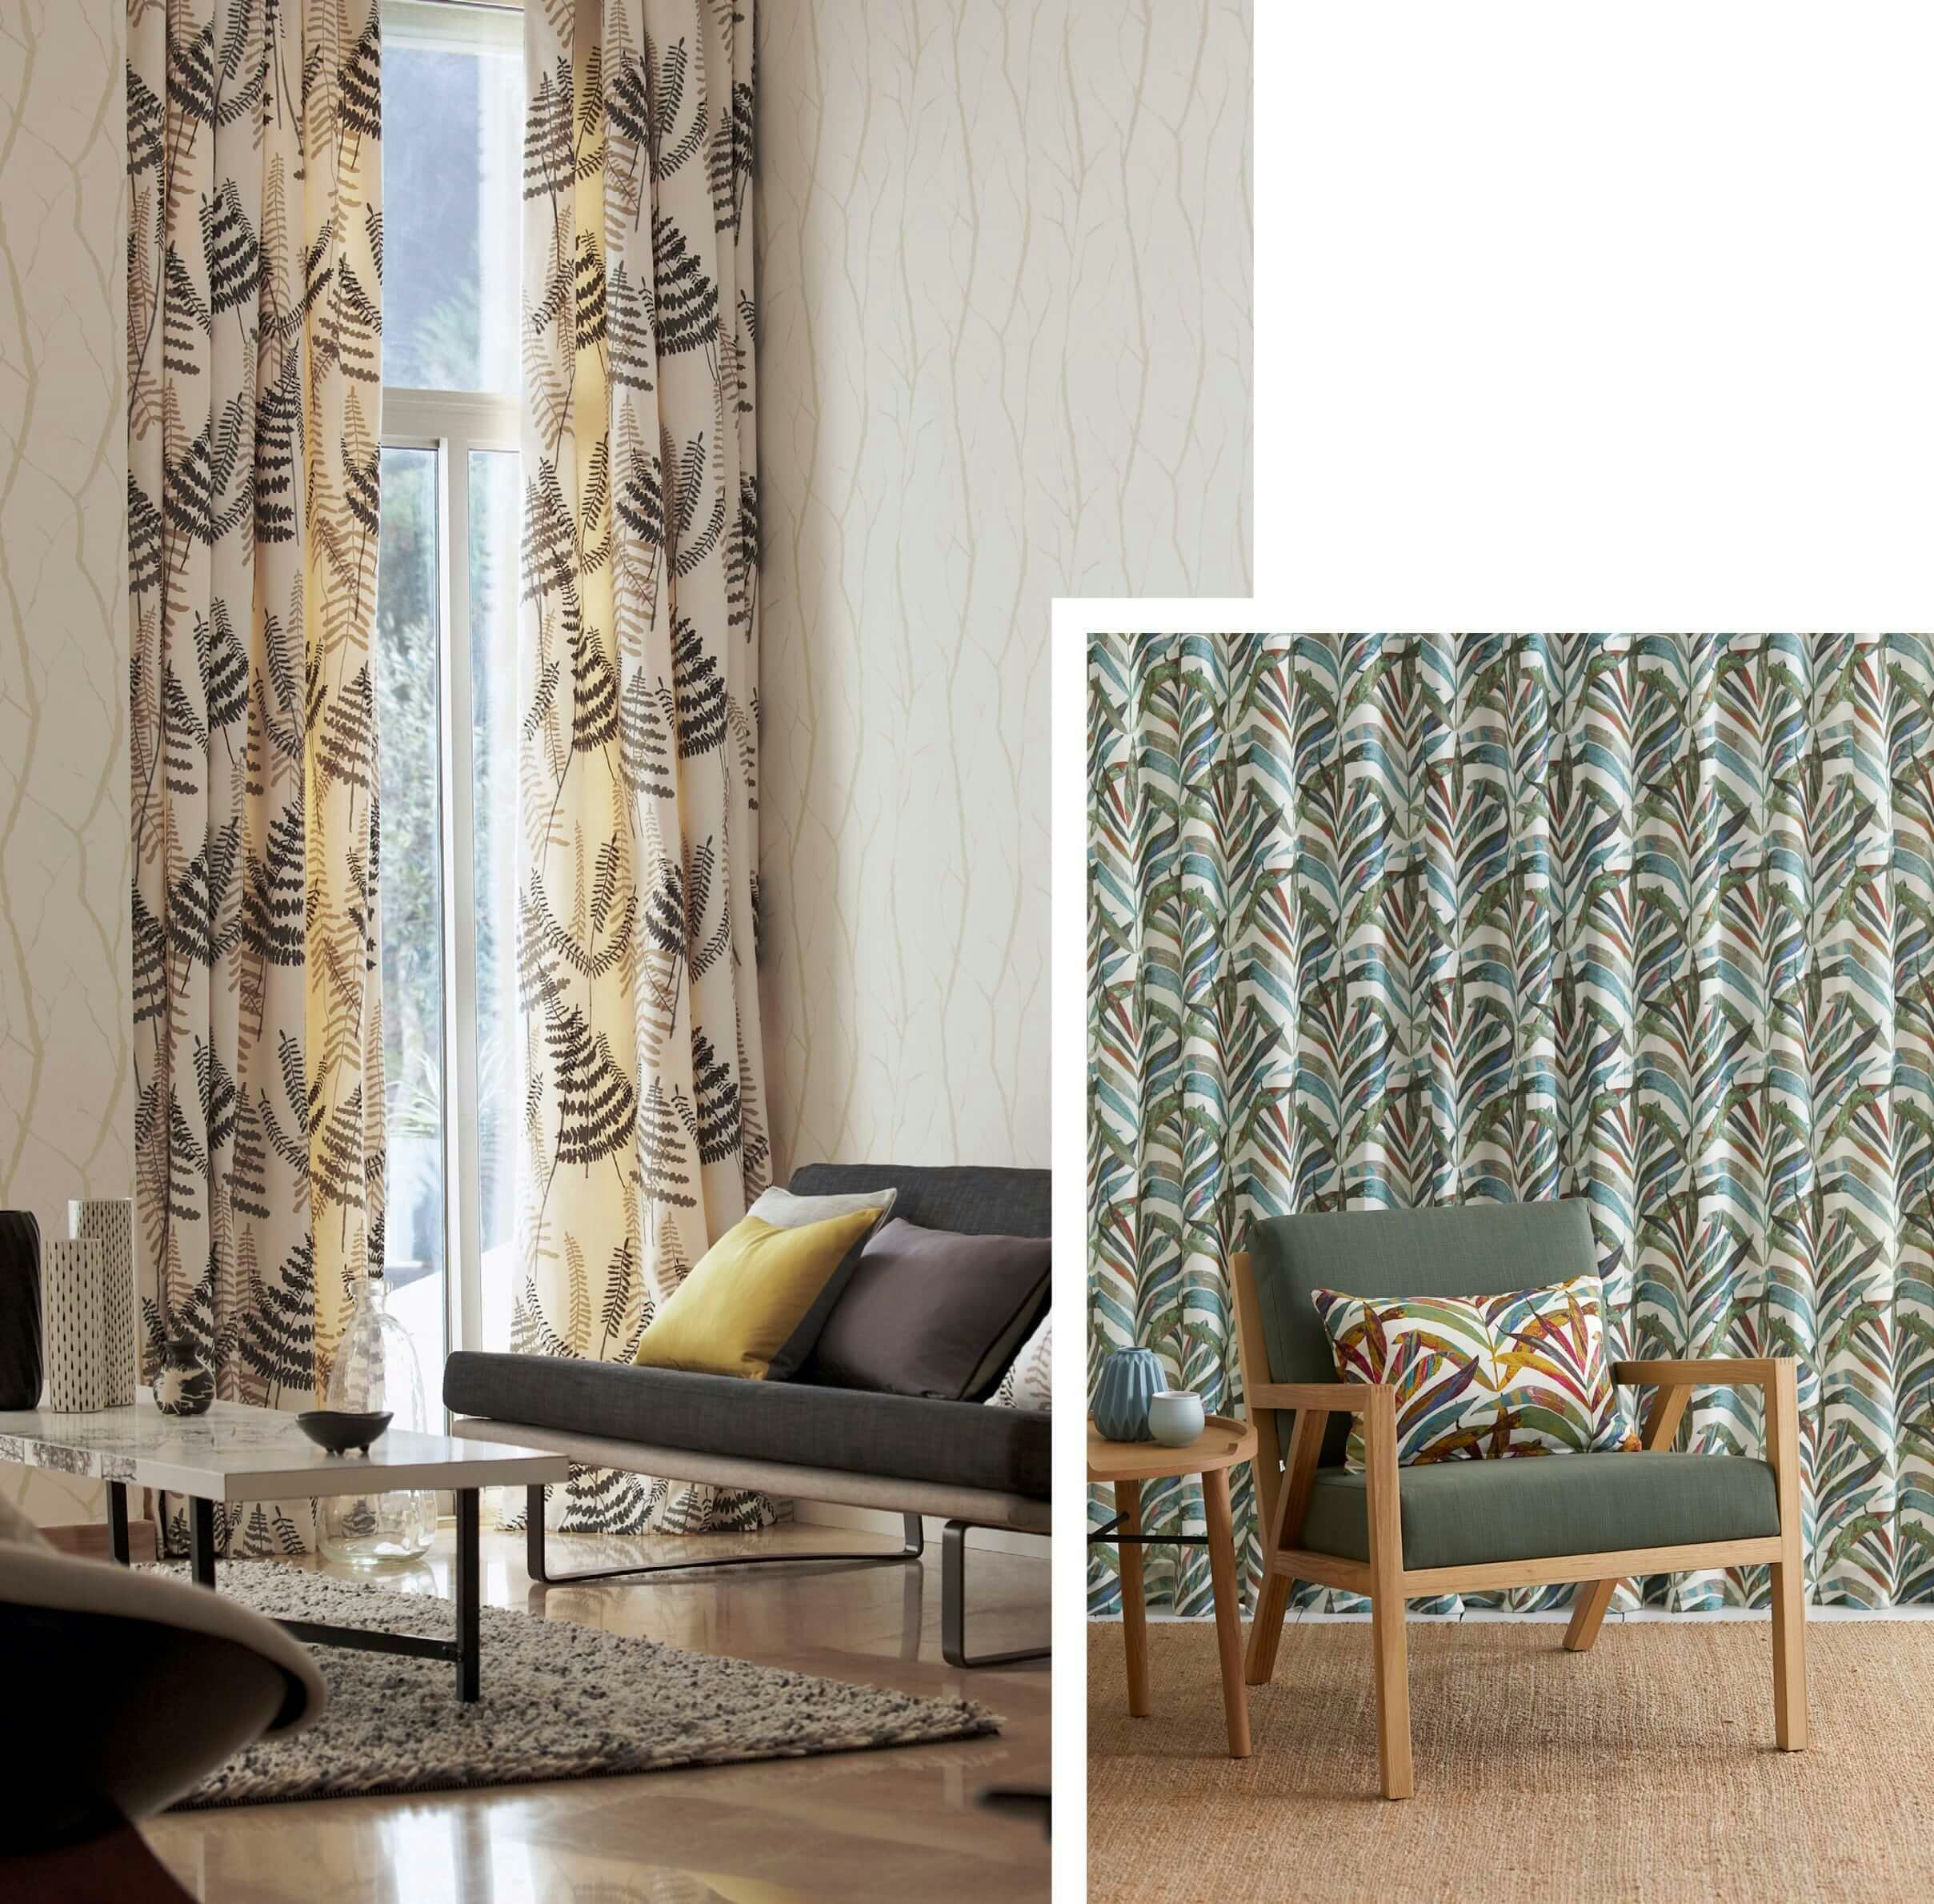 various foliage pattern curtains in modern contemporary lounge rooms on white timber walls